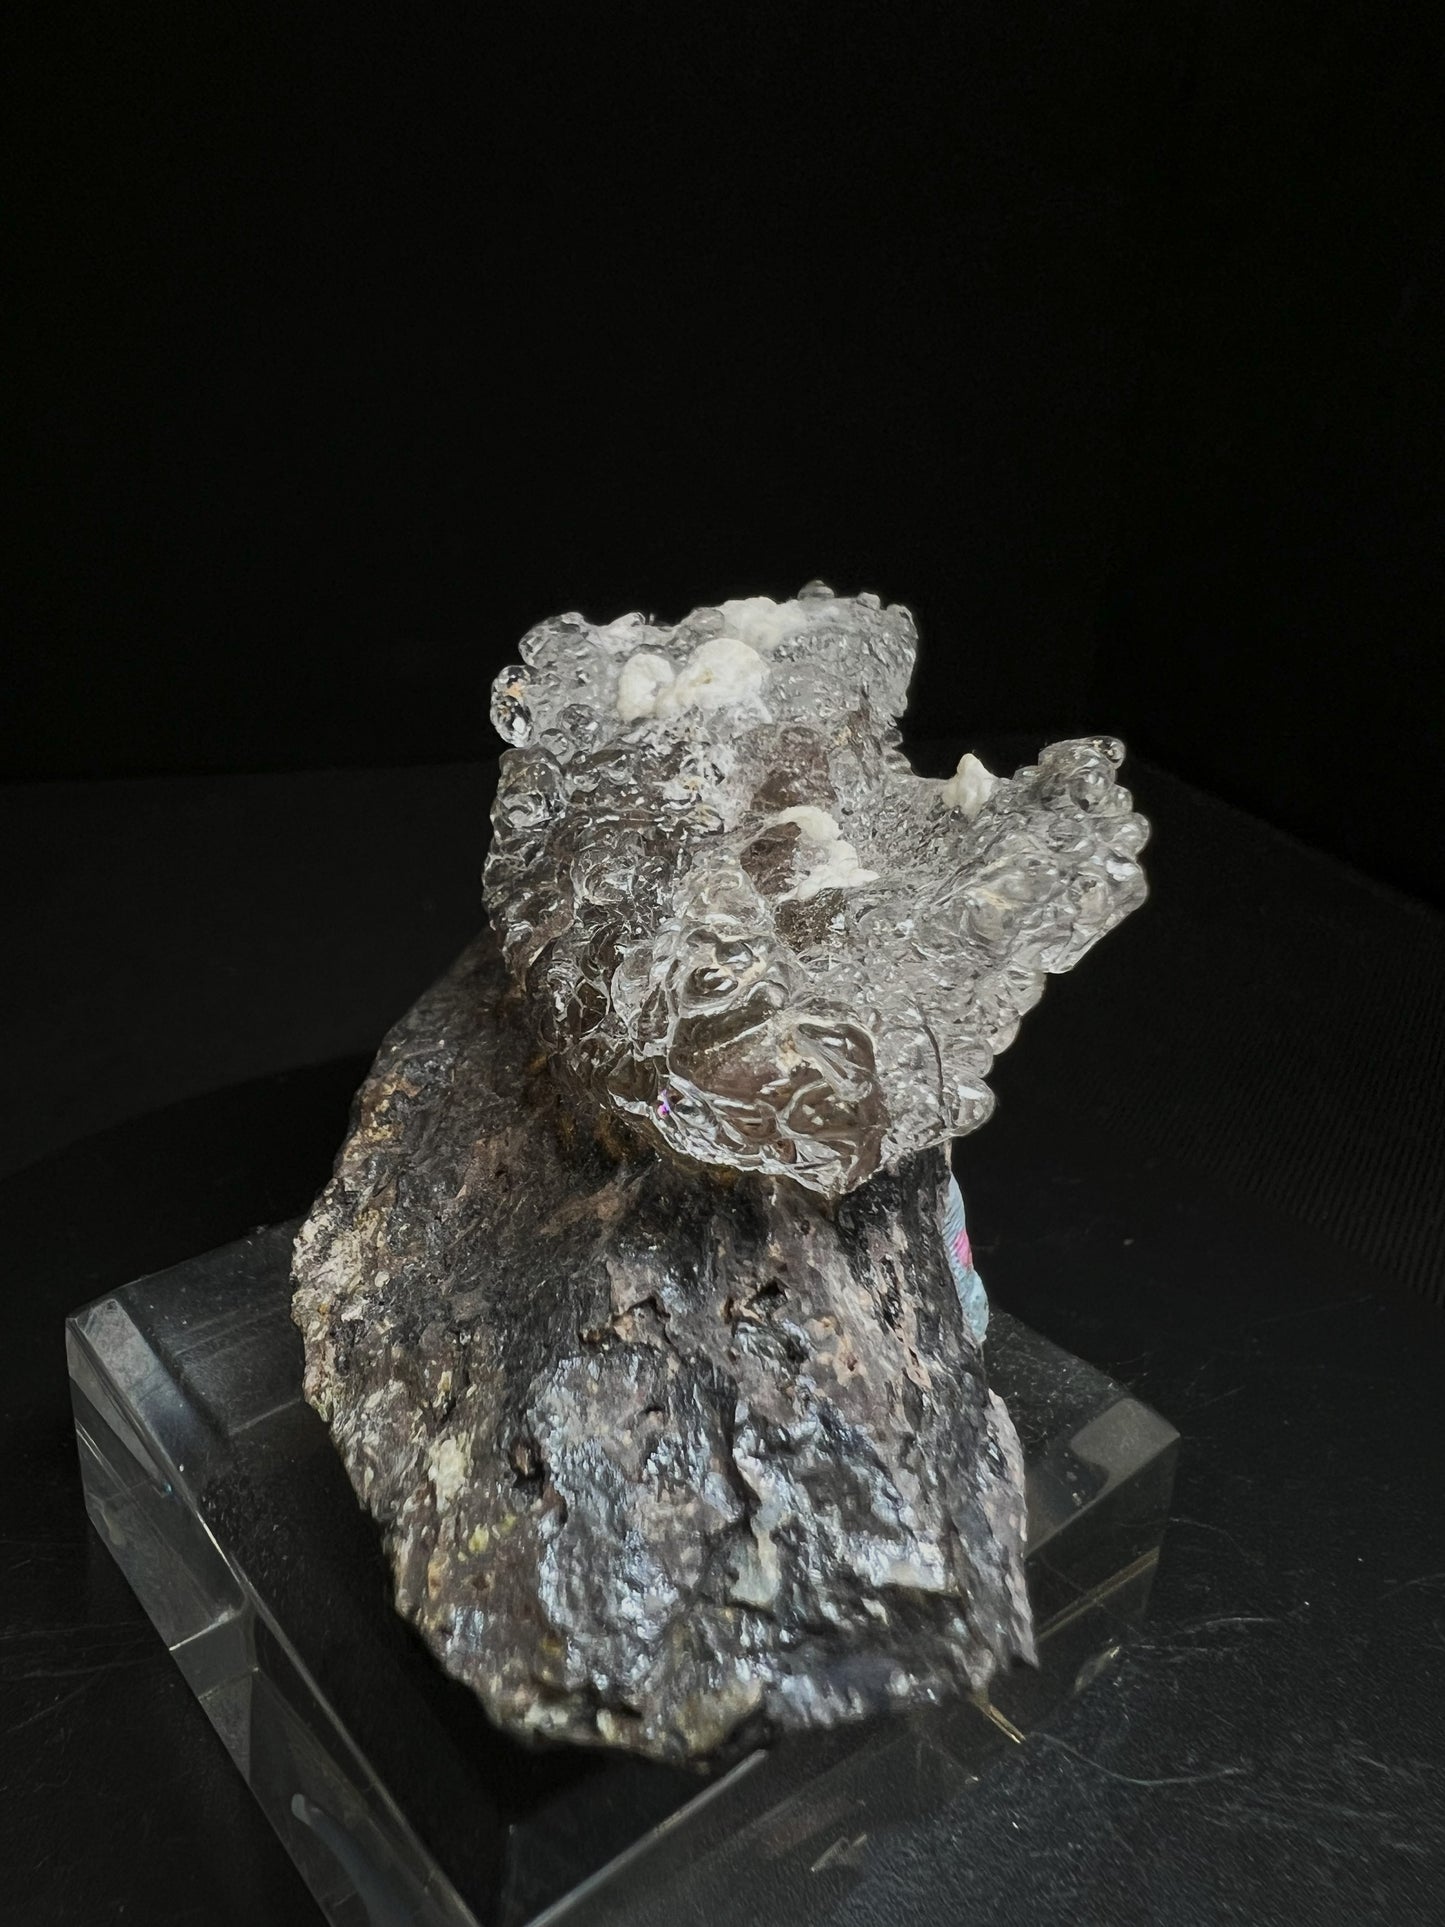 Hyalite Opal On Matrix From Mexico- Collectors Piece, Home Décor, Statement Piece